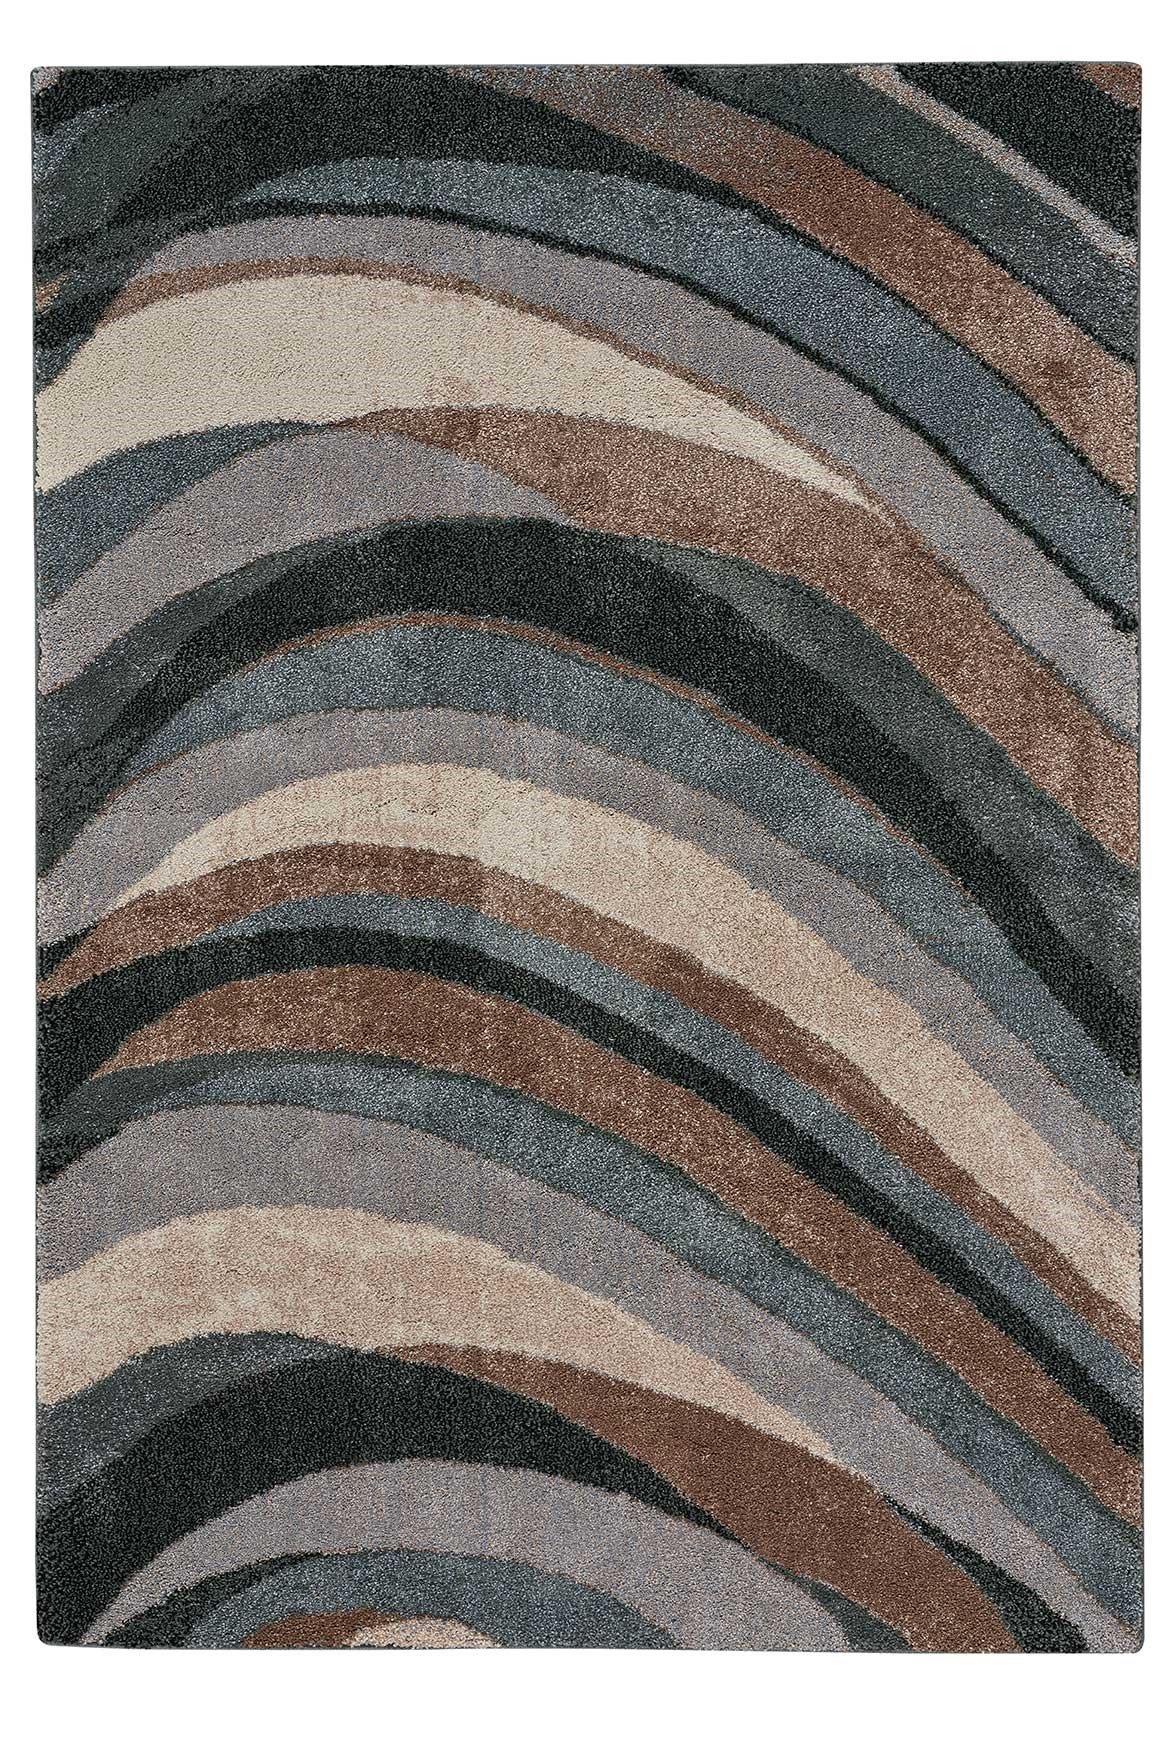 Thick Area Rugs Carpets Direct, 3×5 Rug Size